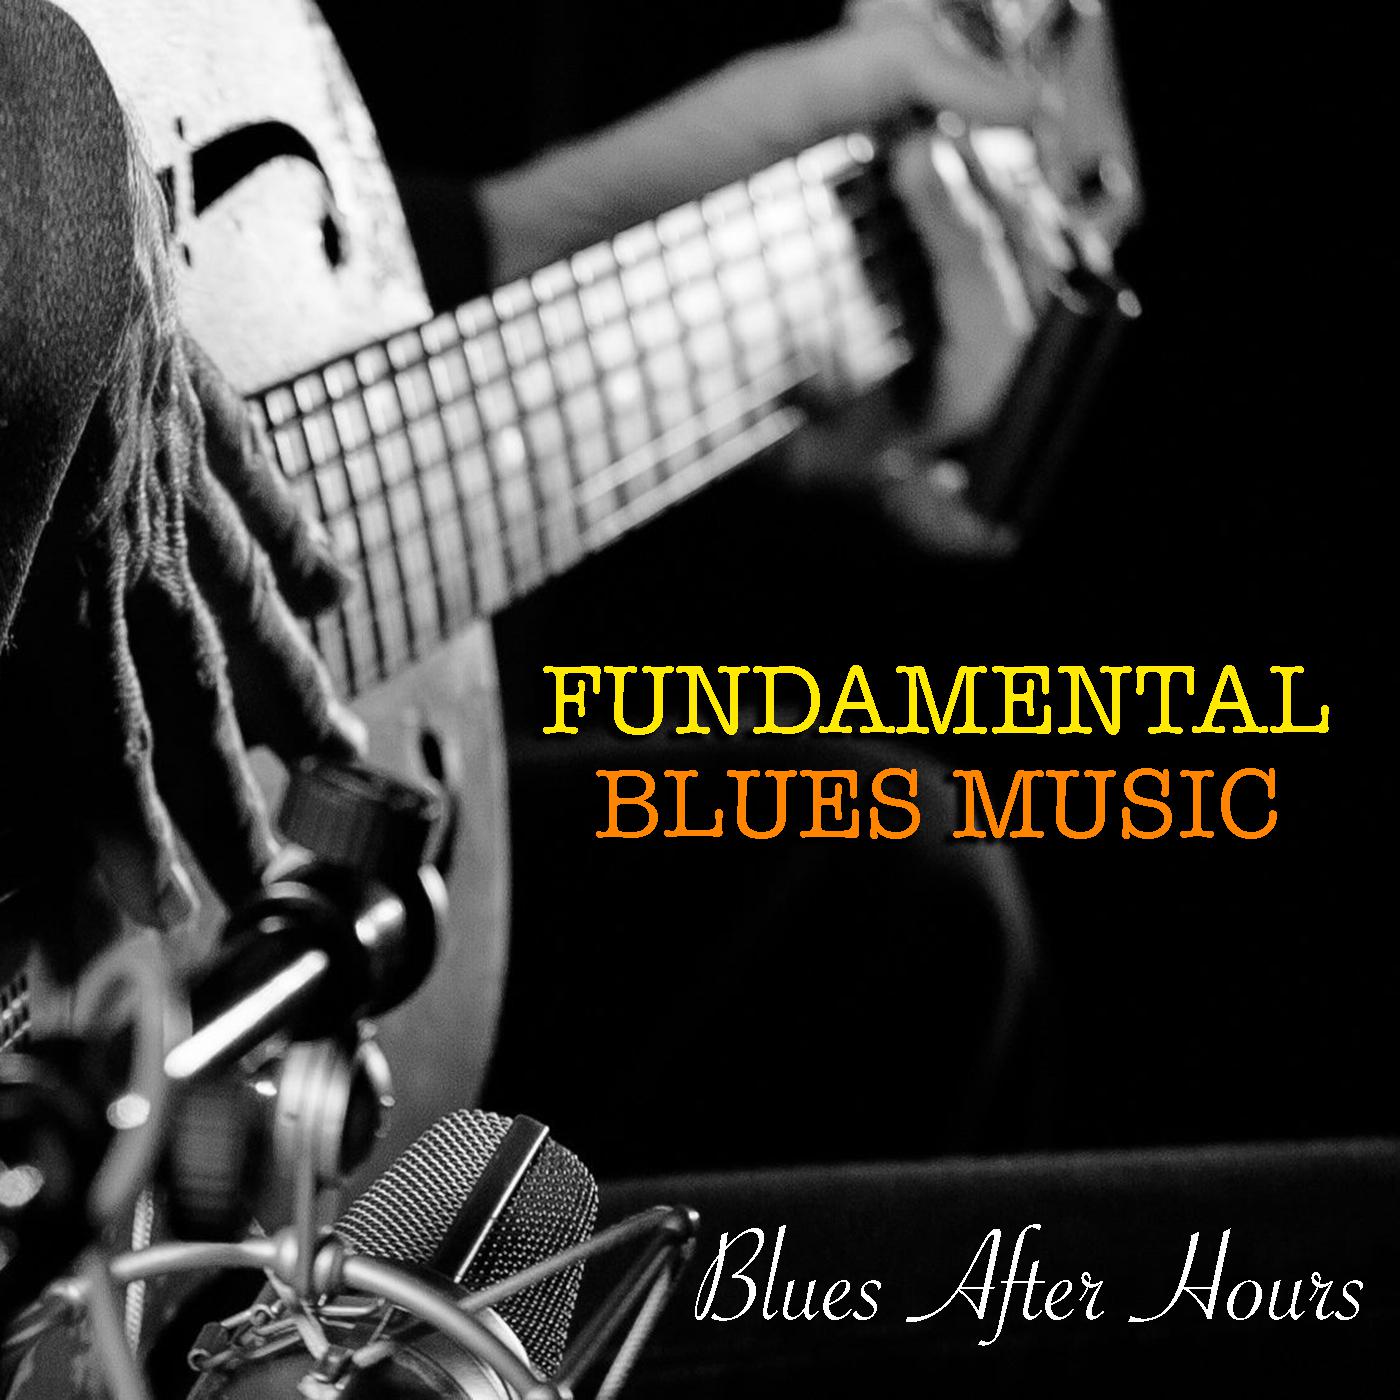 Blues After Hours Fundamental Blues Music